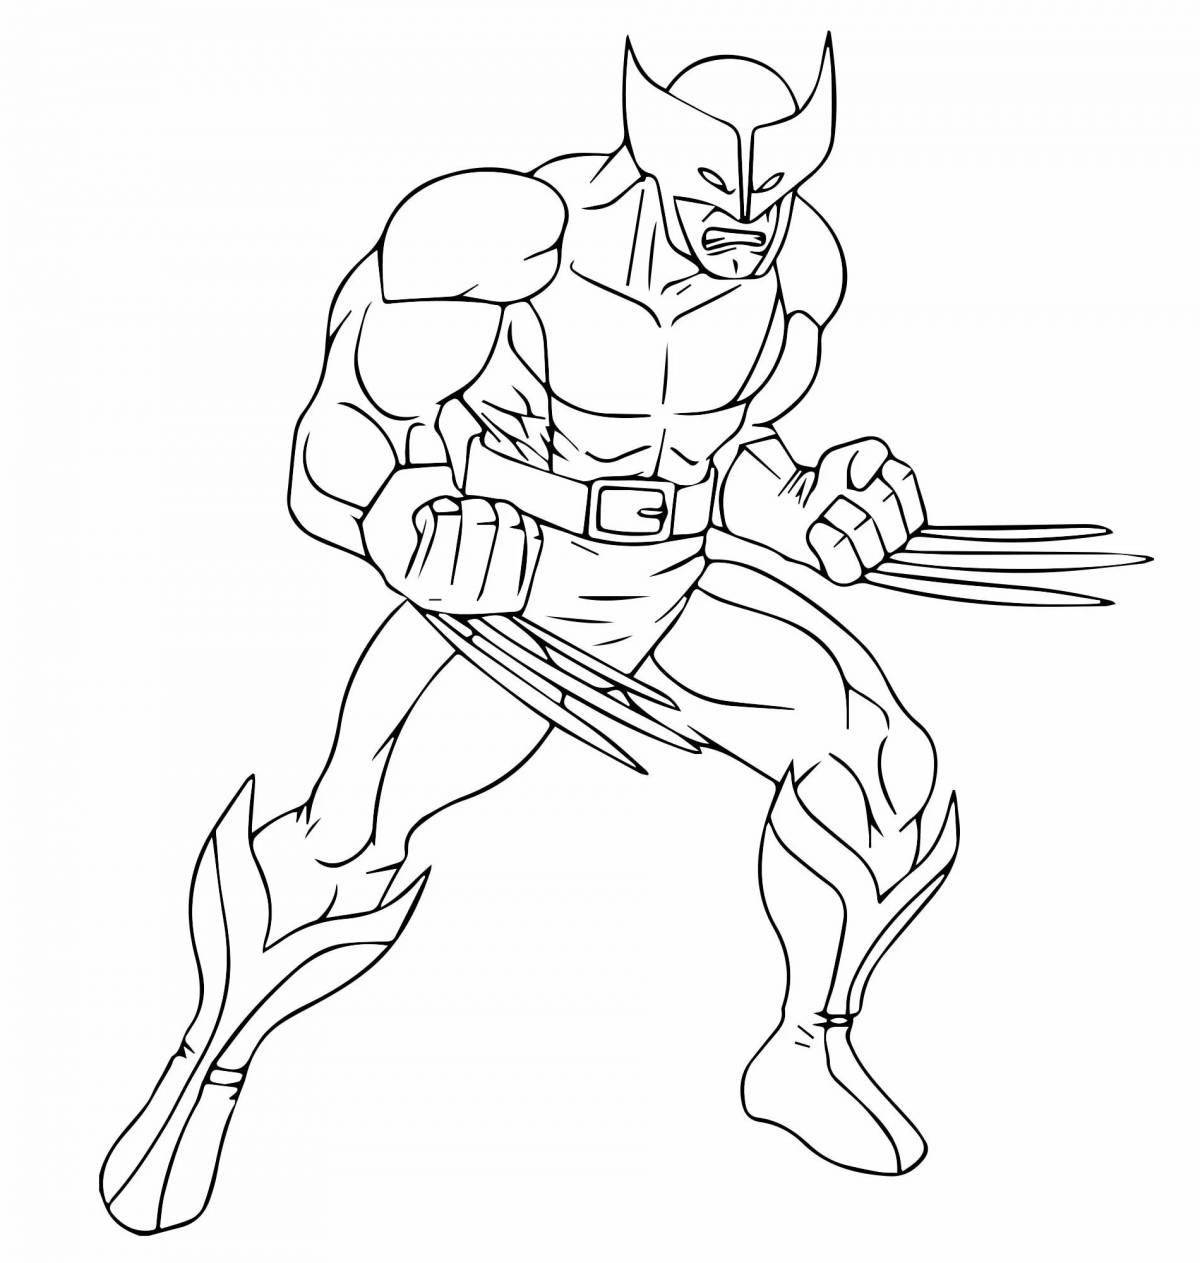 Adorable superhero coloring book for kids 5-6 years old